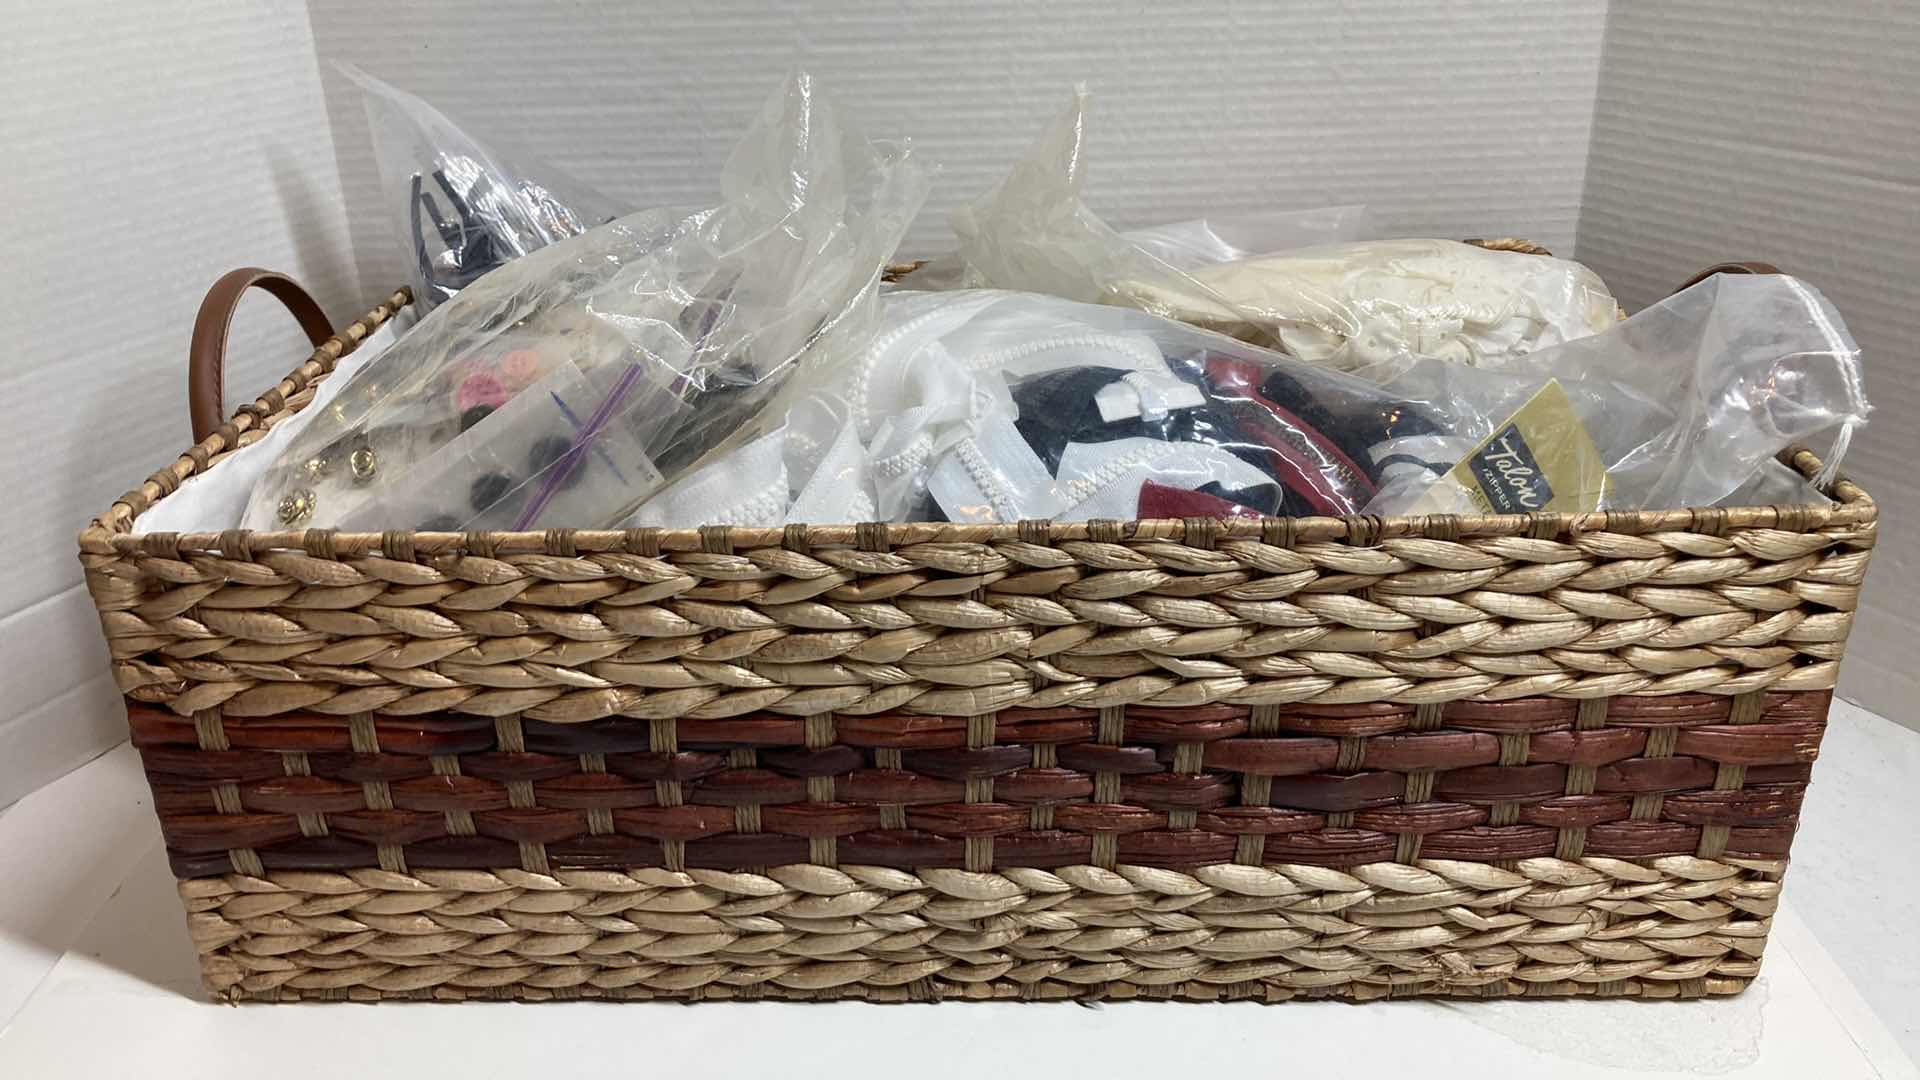 Photo 9 of FABRIC ZIPPERS, BUTTONS, REMNANTS & ACCESSORIES W WICKER BASKET 21” X 12” H7”